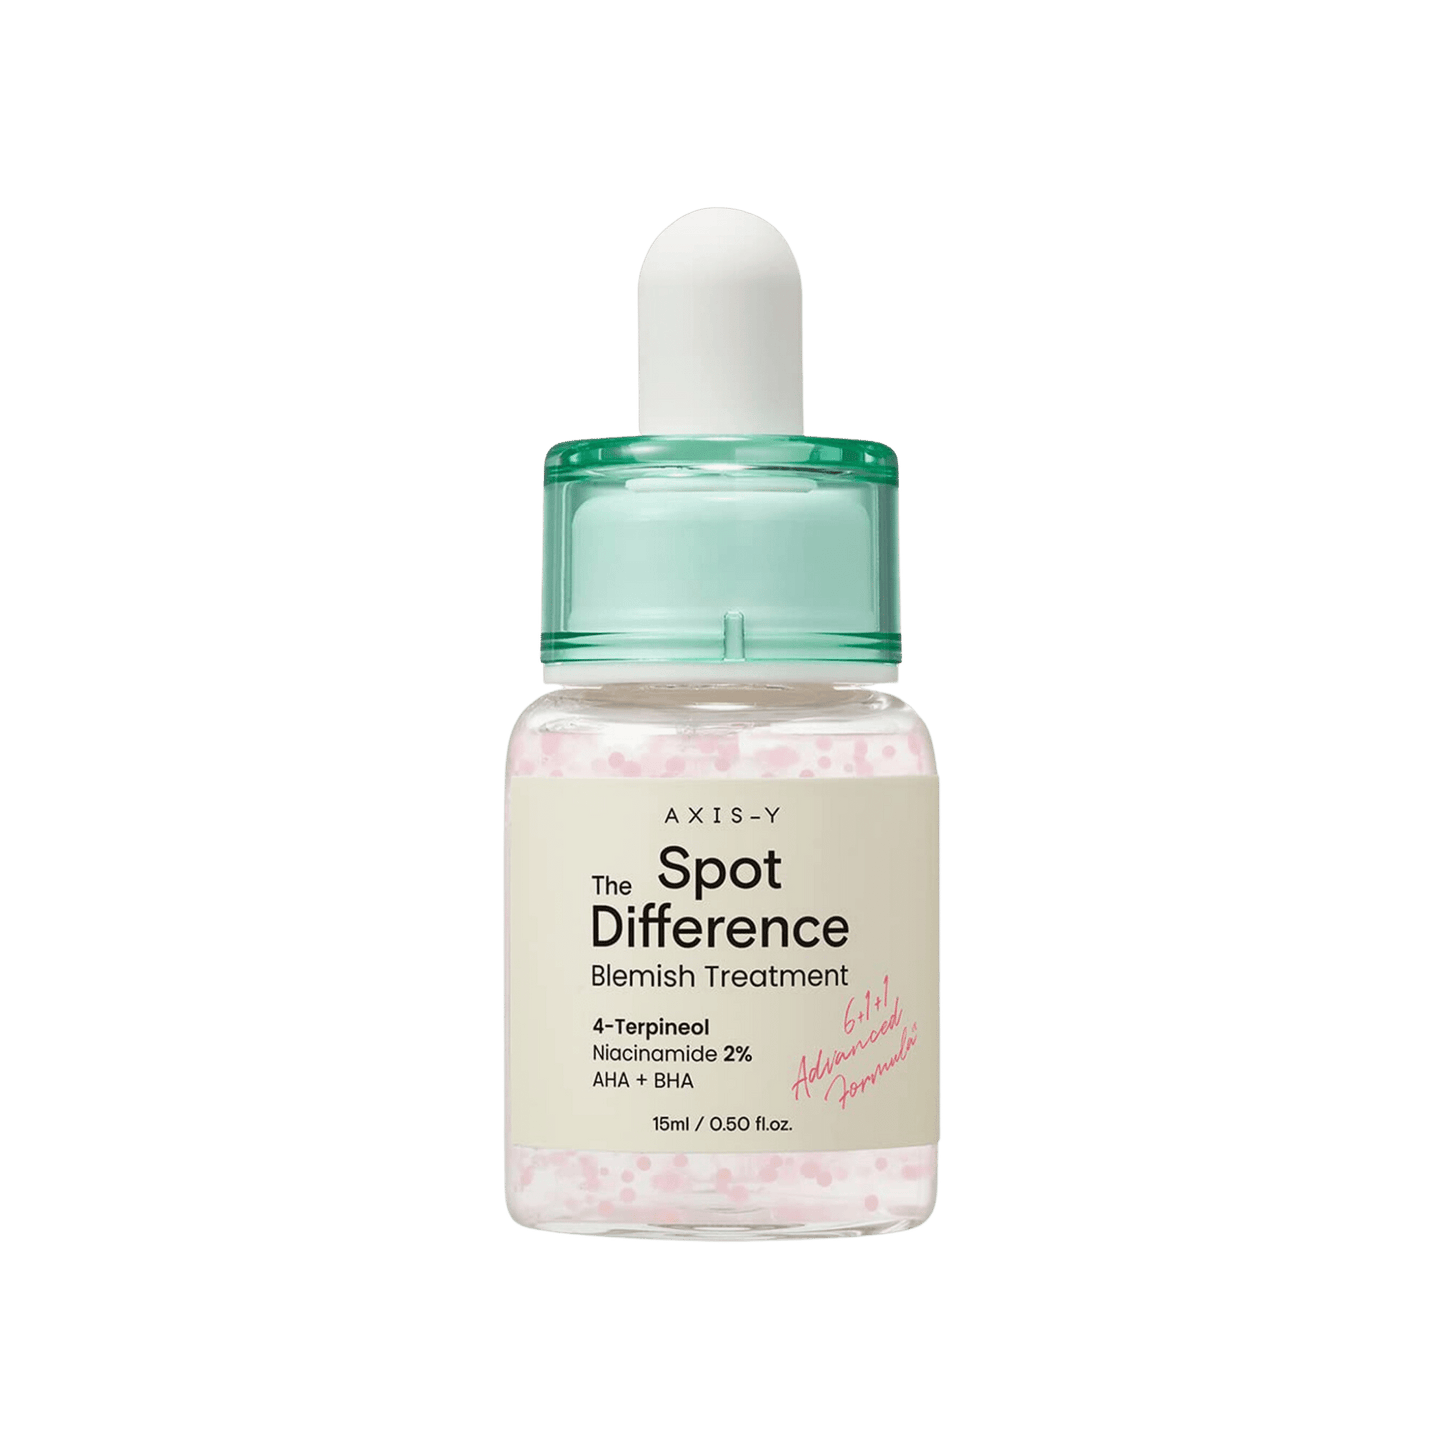 AXIS-Y Spot The Difference Blemish Treatment Is Now Available At Your Doorstep!